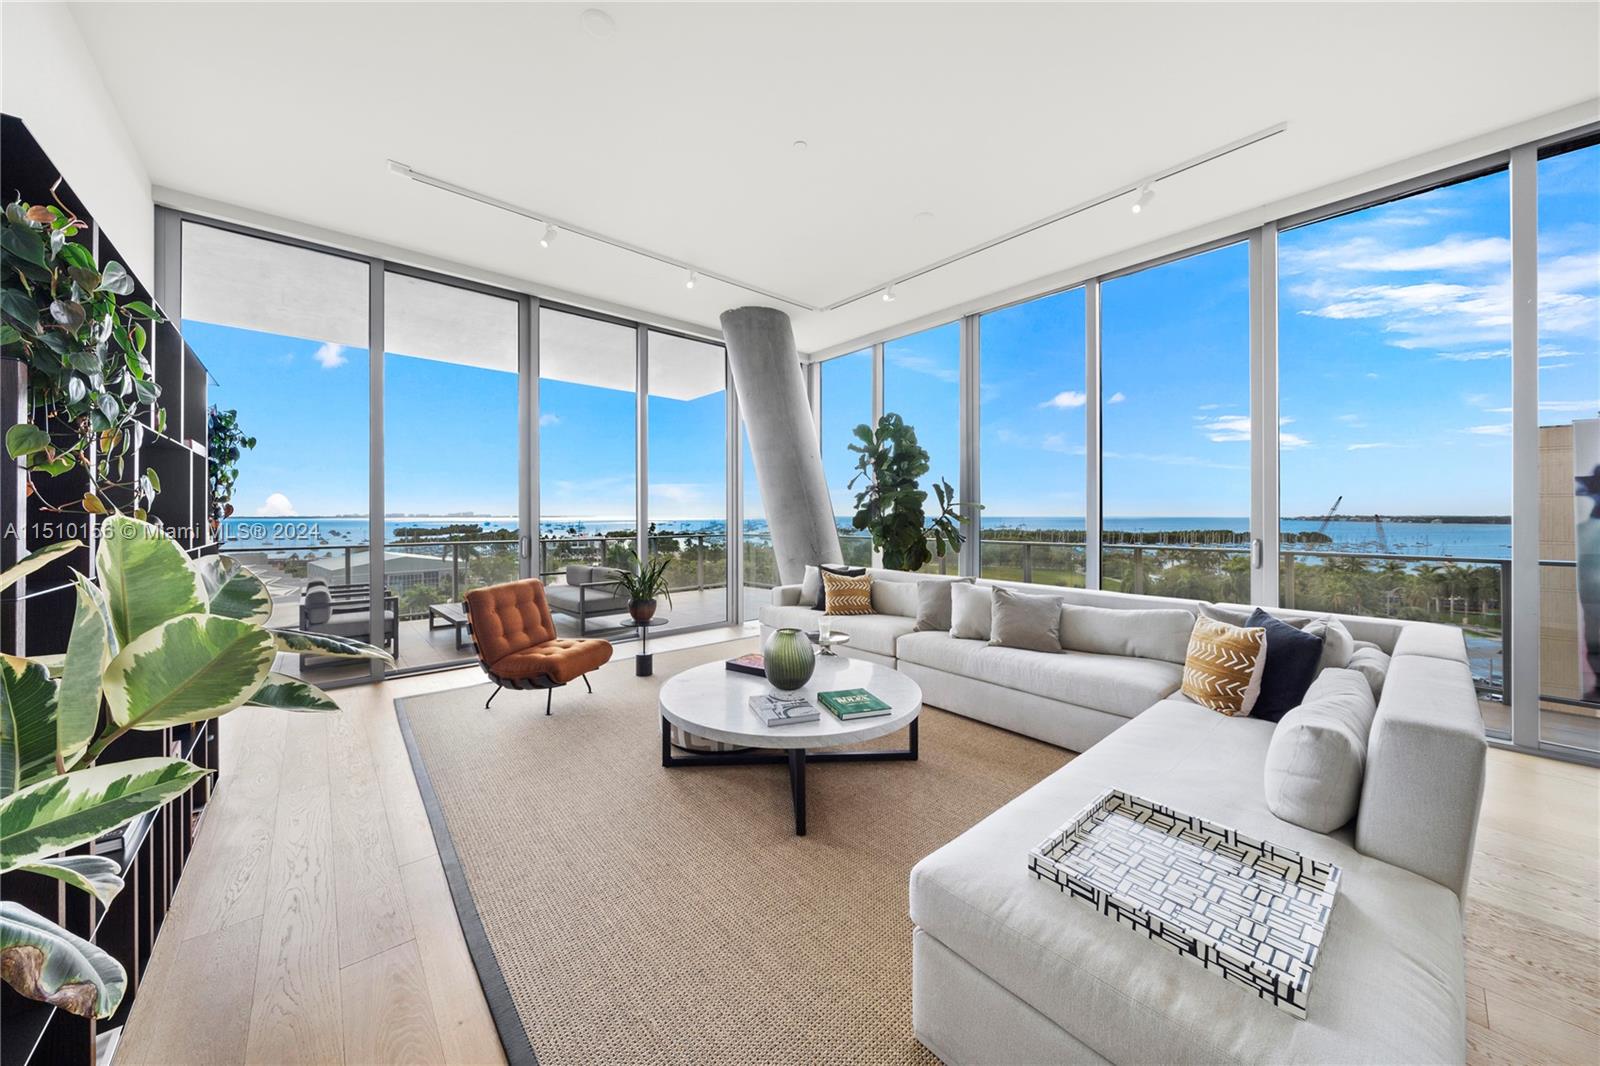 Welcome to Unit 702S at the Grove at Grand Bay in Coconut Grove. This stunning 3,929 SF, 4 beds+staff, 5.1 baths, and exquisite finishes. Enjoy panoramic views of Biscayne Bay & the Miami skyline featuring 12-ft-high, floor-to-ceiling glass leading to wraparound terraces that are 12 ft deep. A spacious primary bedroom w/ ocean views & an expansive walk-in closet & primary bath. W/ 3 additional bedrooms, each w/ ensuite baths & closets + an extra service bed w/ full bath & powder bath. The kitchen is a chef's dream w/ top-of-the-line Miele appliances. Residents can enjoy the best amenities, from concierge services to a restaurant, spa, fitness center, swimming pool & walking distance to some of the best school's in Miami.